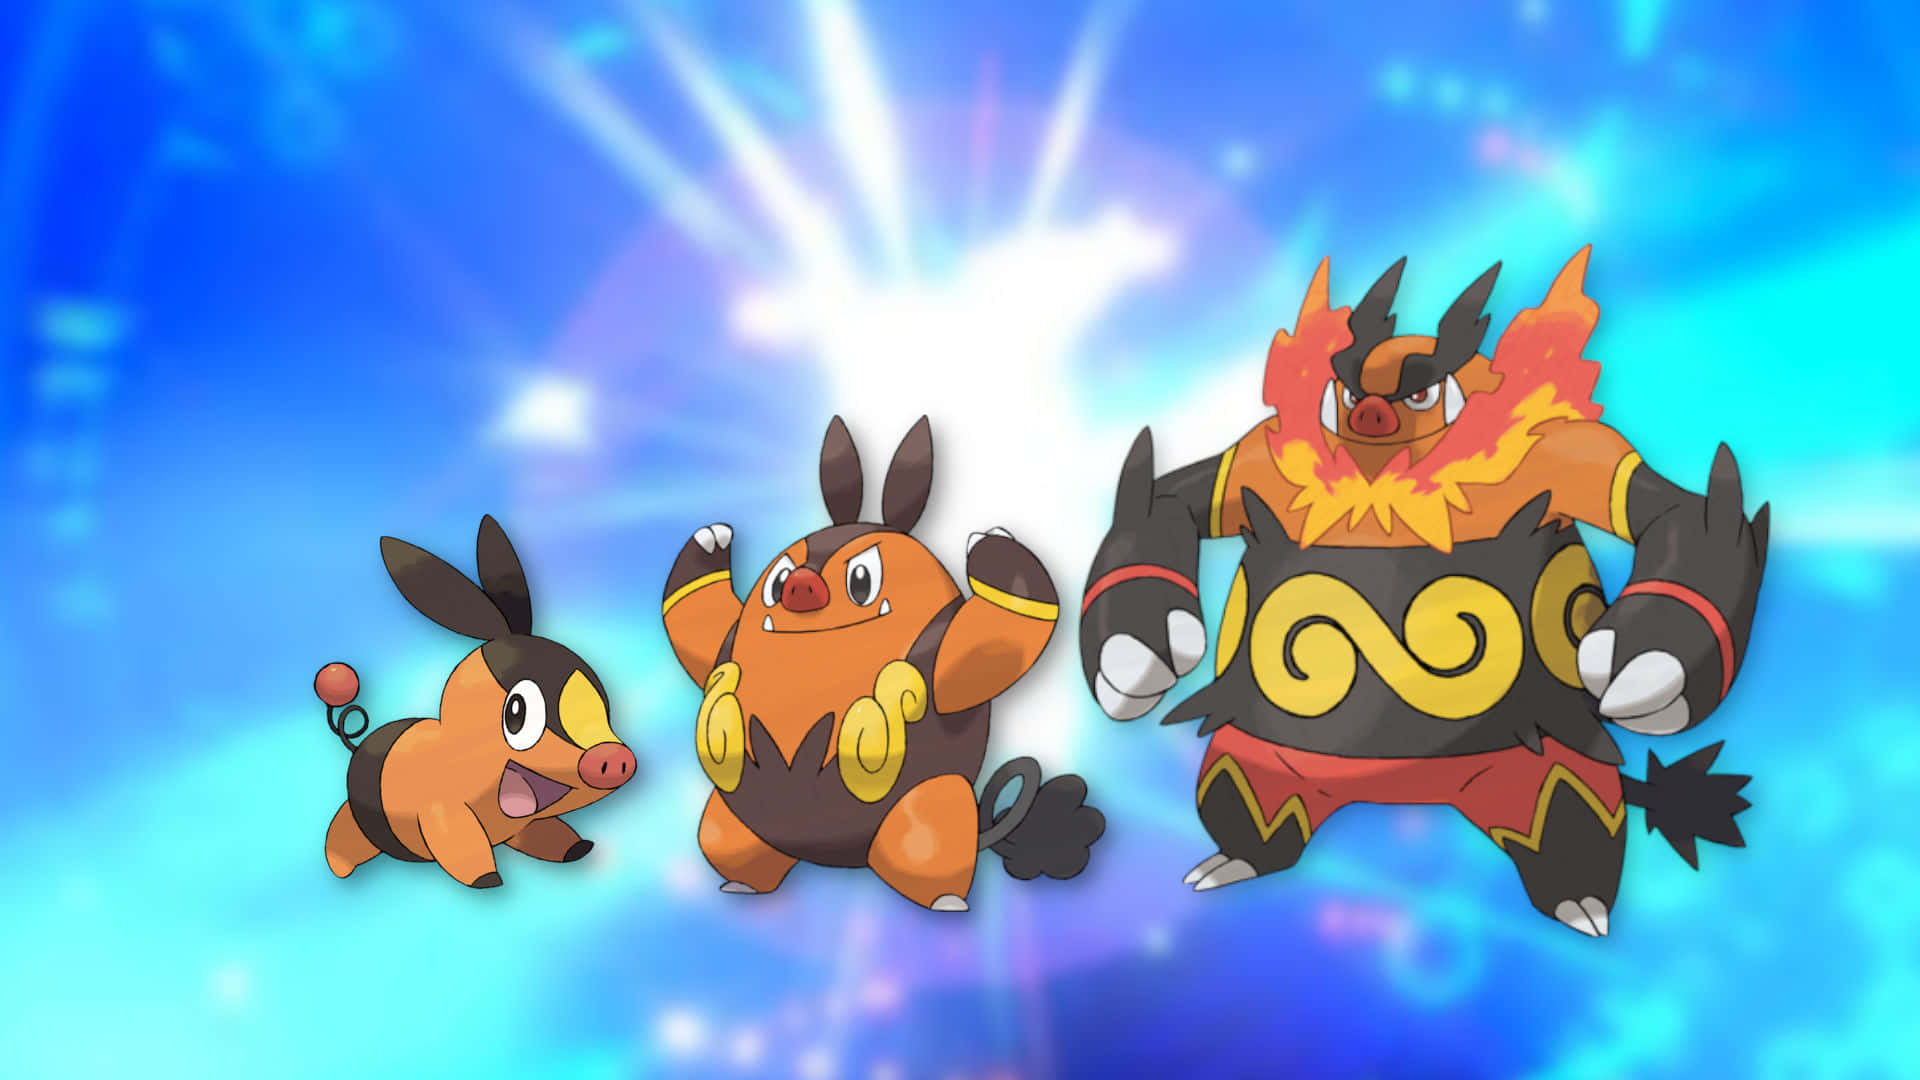 Witness the power of evolution as four generations of Pokemon stand together. Wallpaper